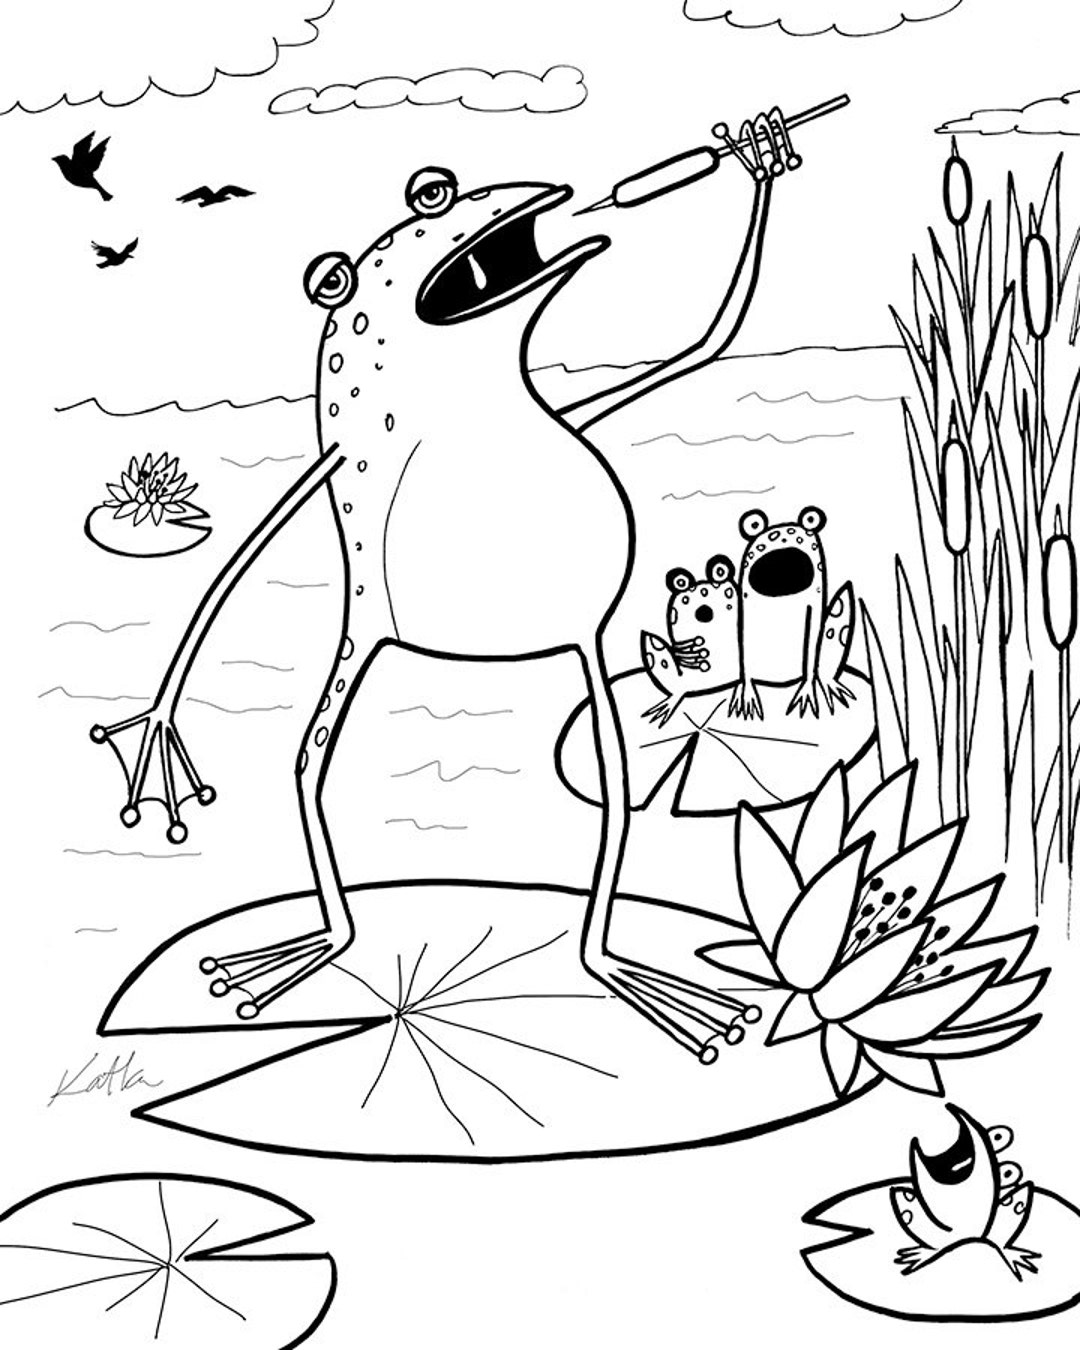 190+ Frog Coloring Page Designs 191